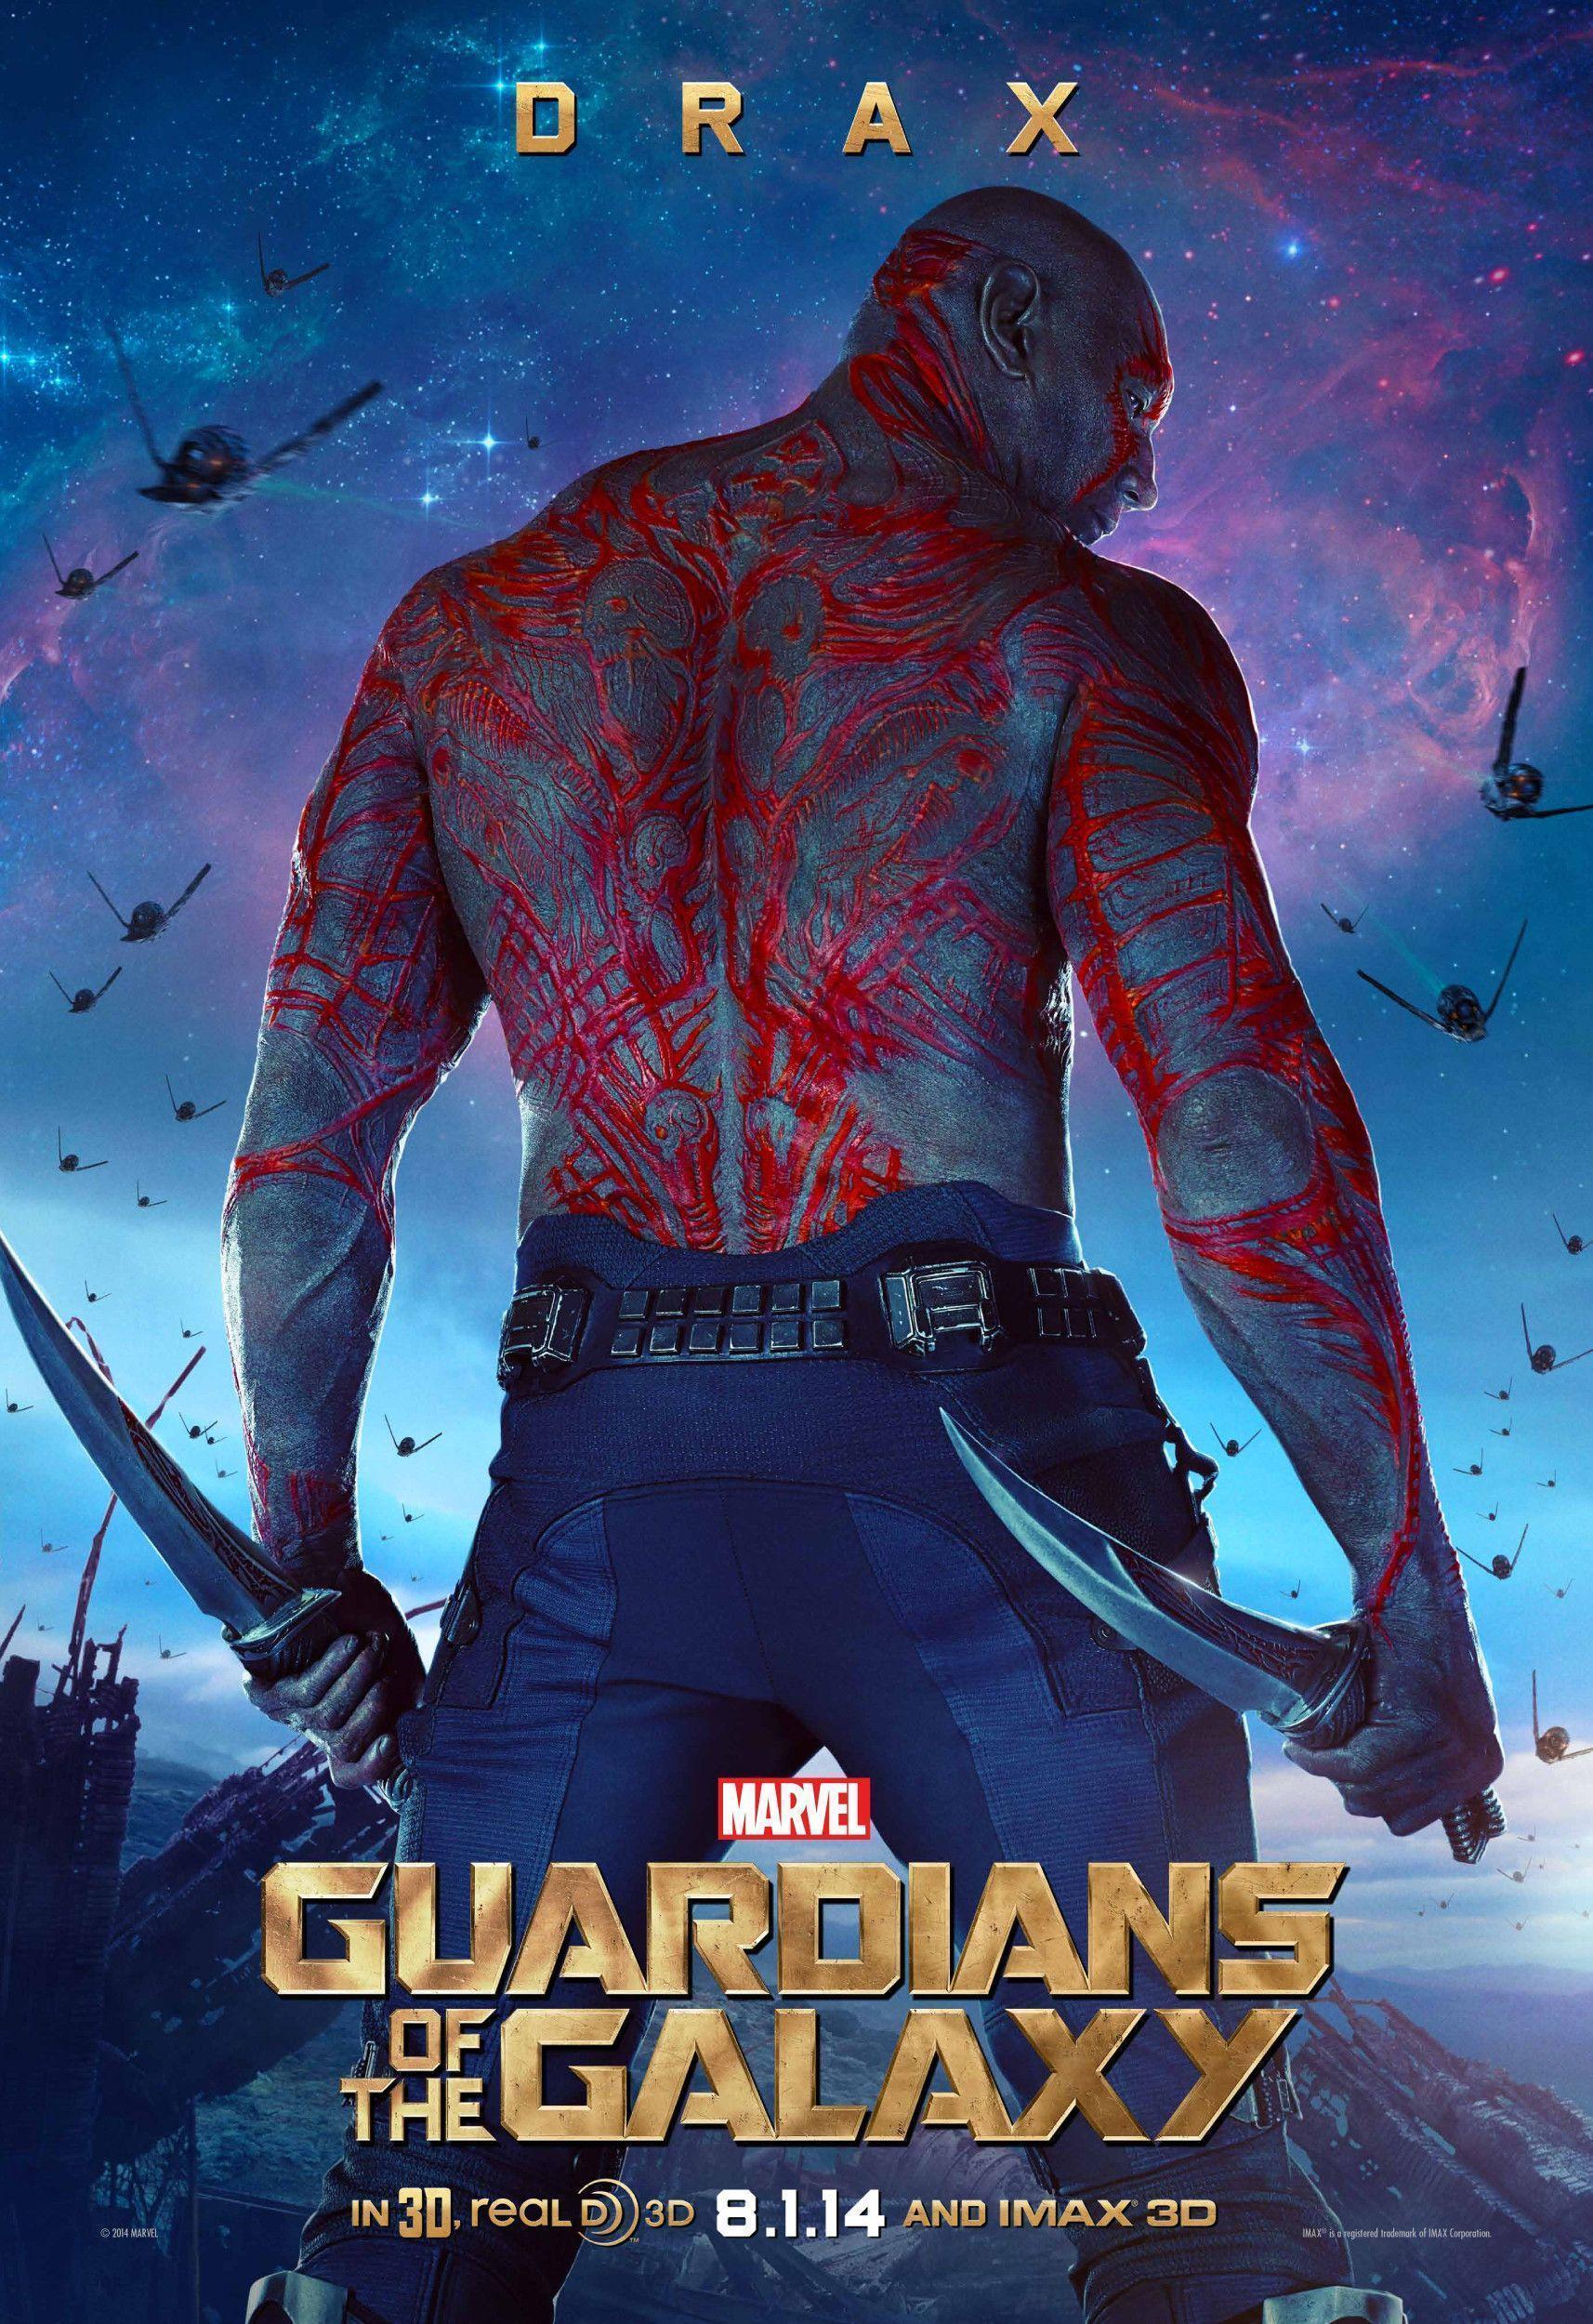 Drax from Marvel's Guardians of the Galaxy Desktop Wallpaper